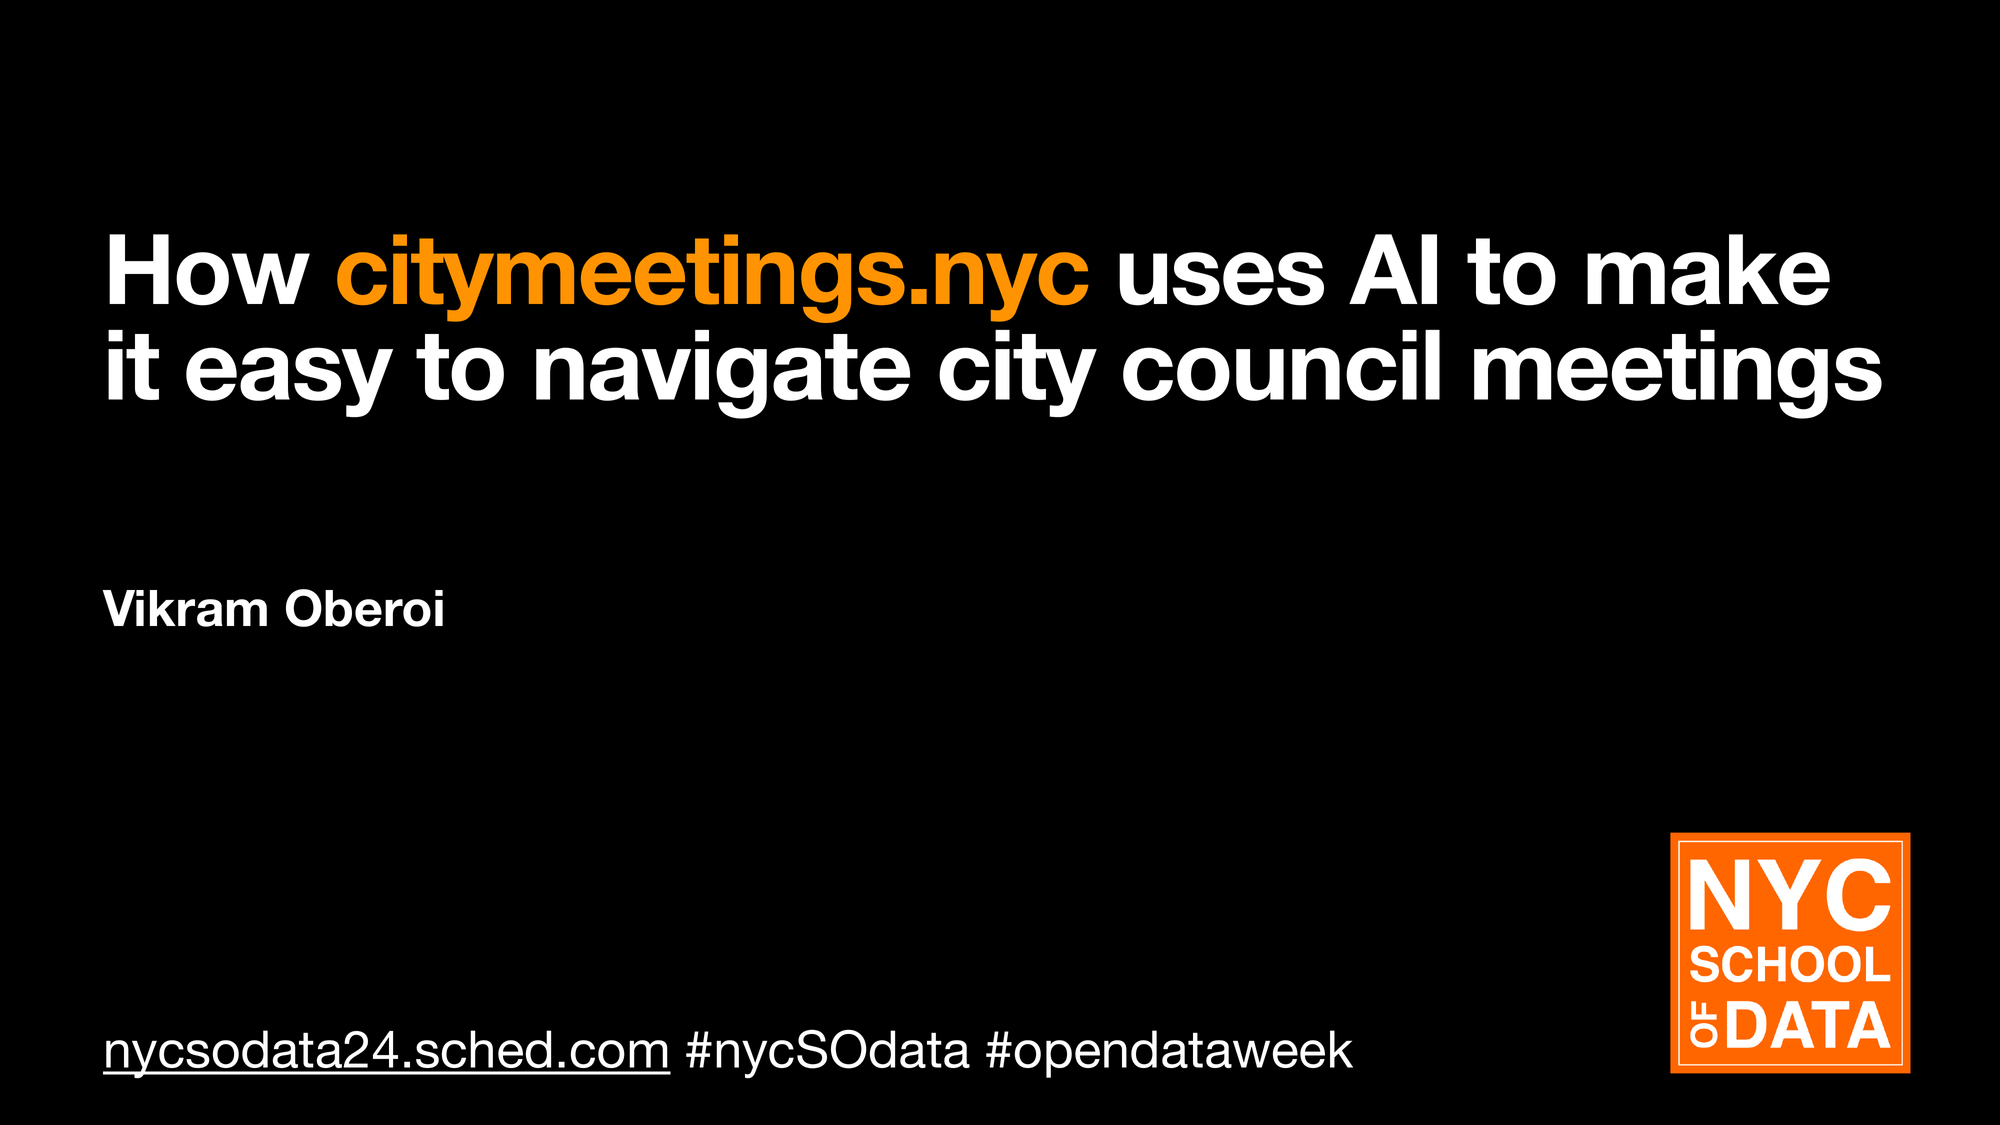 How citymeetings.nyc uses AI to make it easy to navigate city council meetings. NYC School of Data.